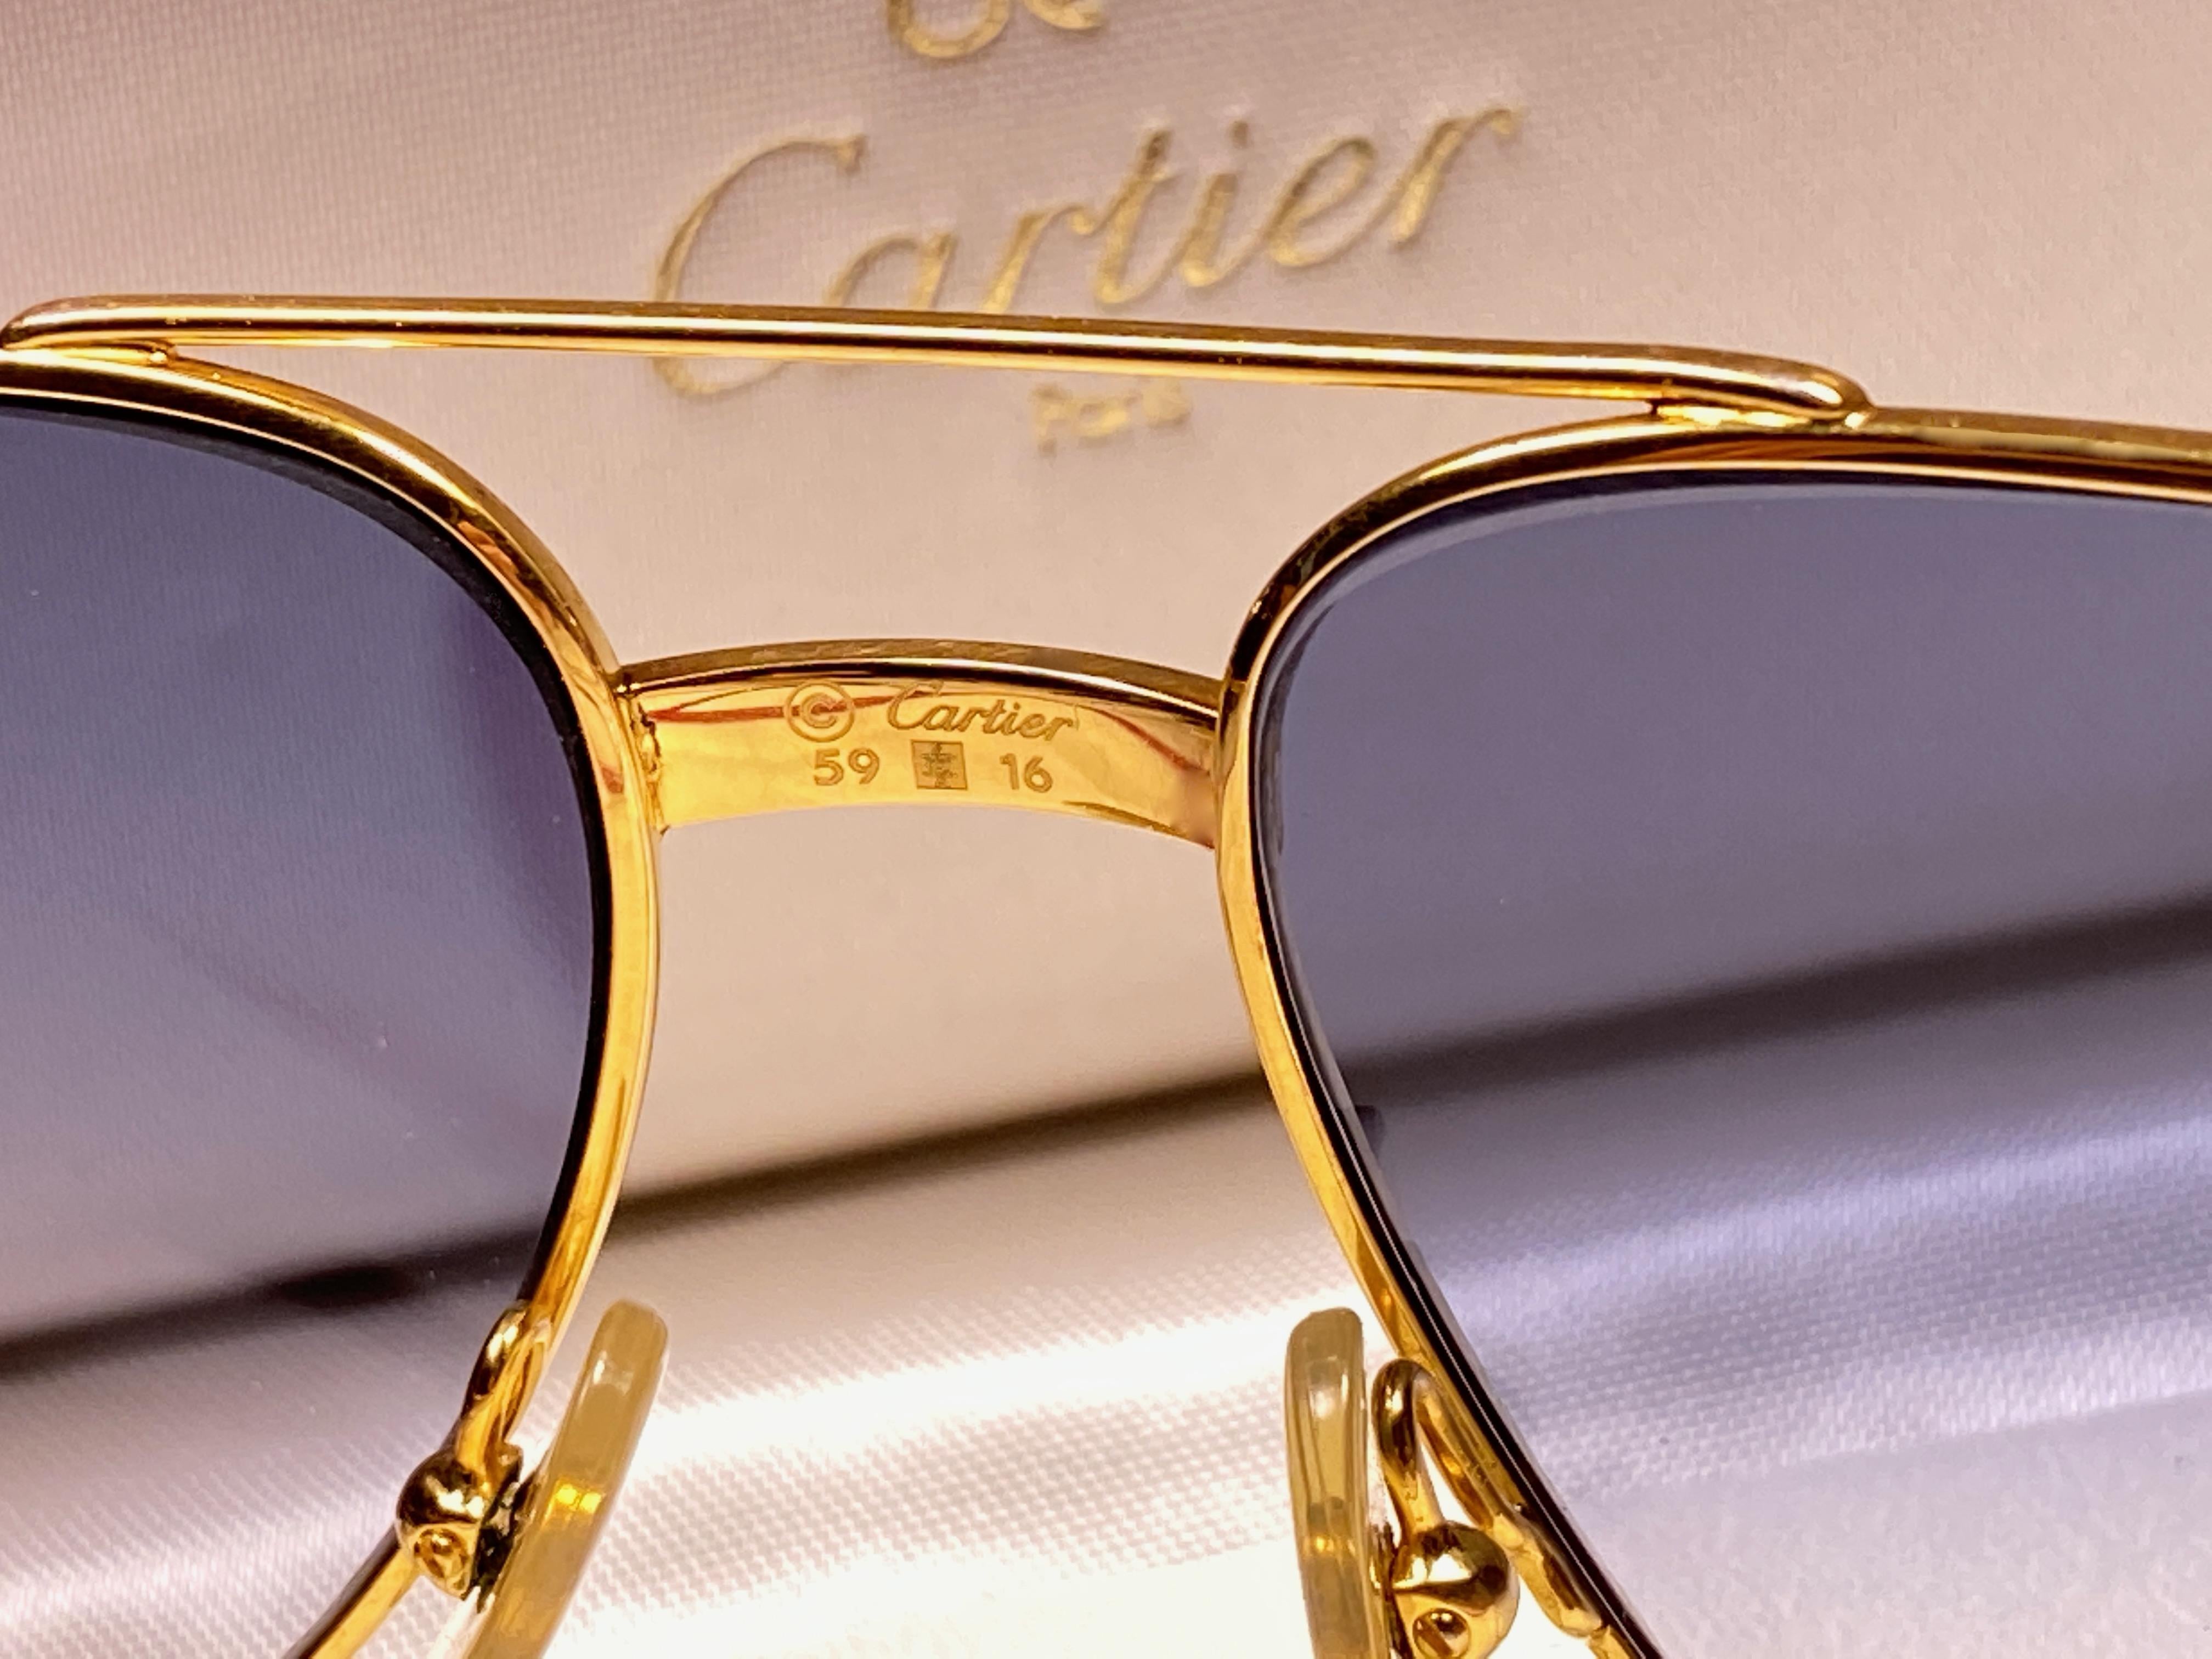 Cartier Santos Screws 1983 59mm 18K Heavy Plated Blue Lens Sunglasses France In Excellent Condition For Sale In Baleares, Baleares